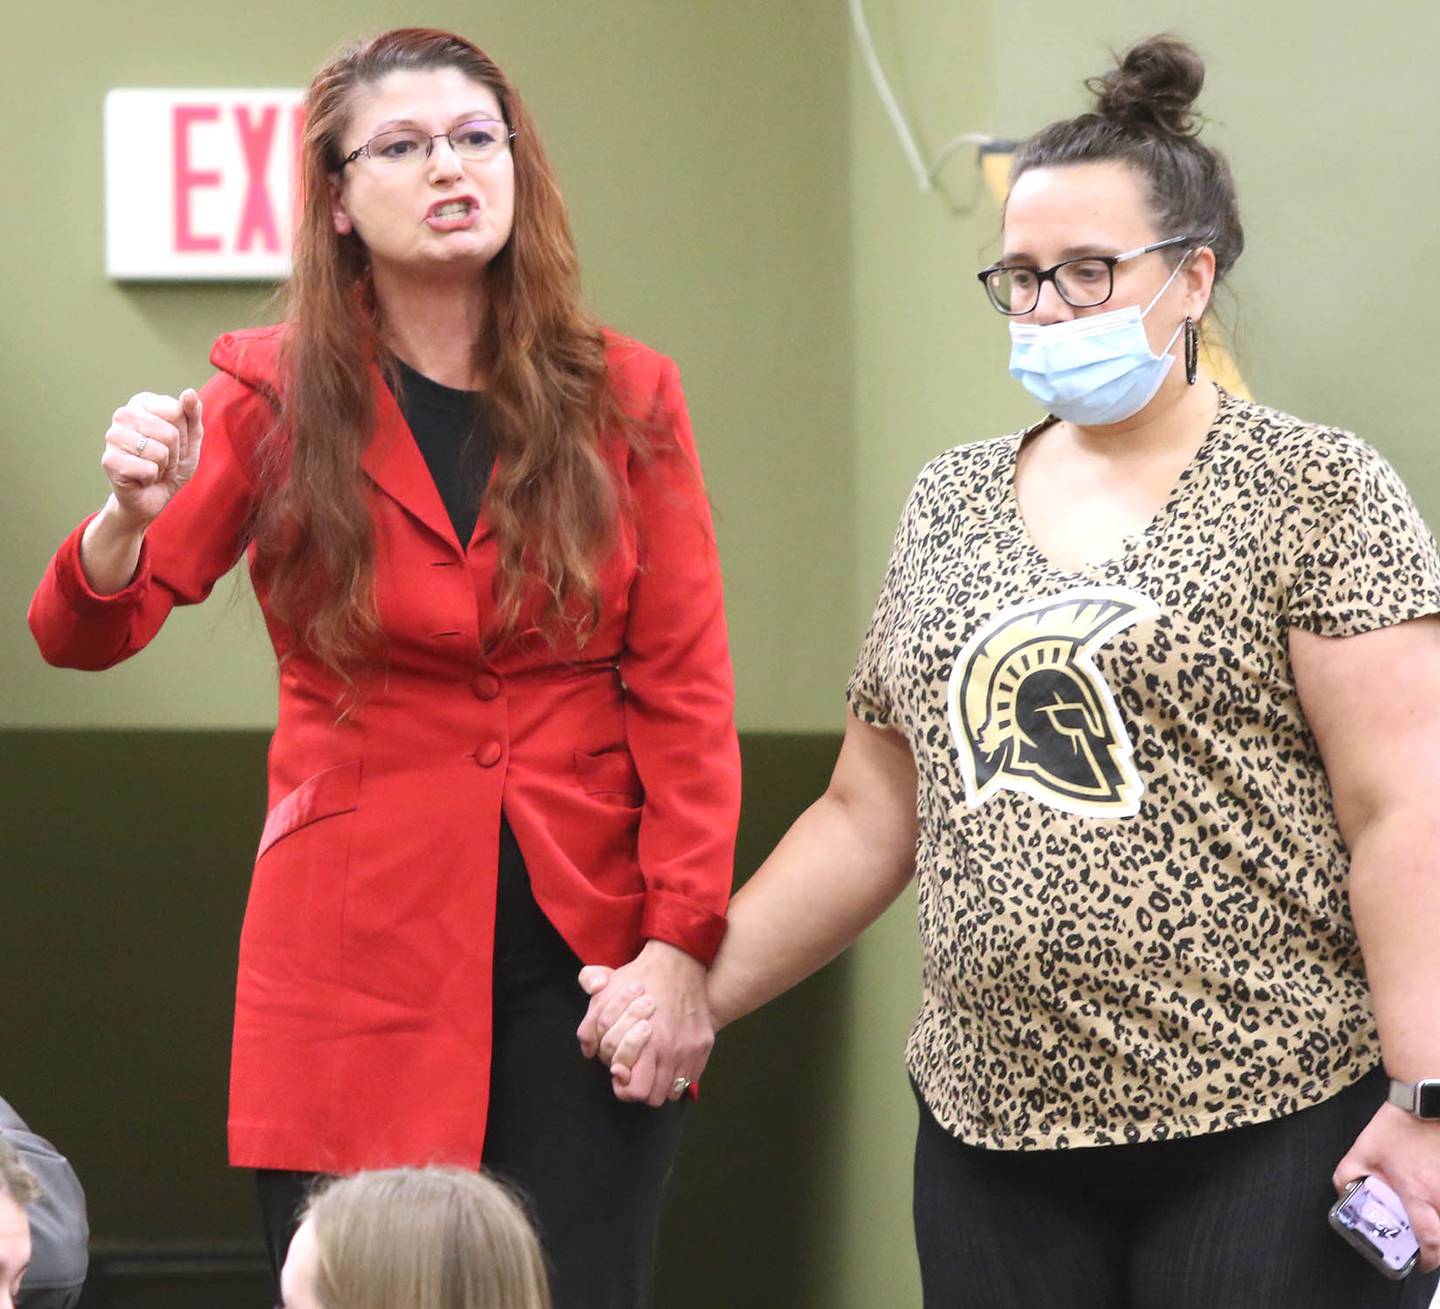 Community members Diana Hulst (left) and Liz Lundeen, who attended the Sycamore District 427 school board meeting to support teachers, asks people to put on masks so the meeting could start Tuesday, Feb. 8, 2022, at Sycamore High School. Despite most of the attendees wearing masks, the meeting was still halted and switched to a virtual format after School Board President Jim Dombeck said several maskless individuals refused to comply with districts instruction to wear a face covering.